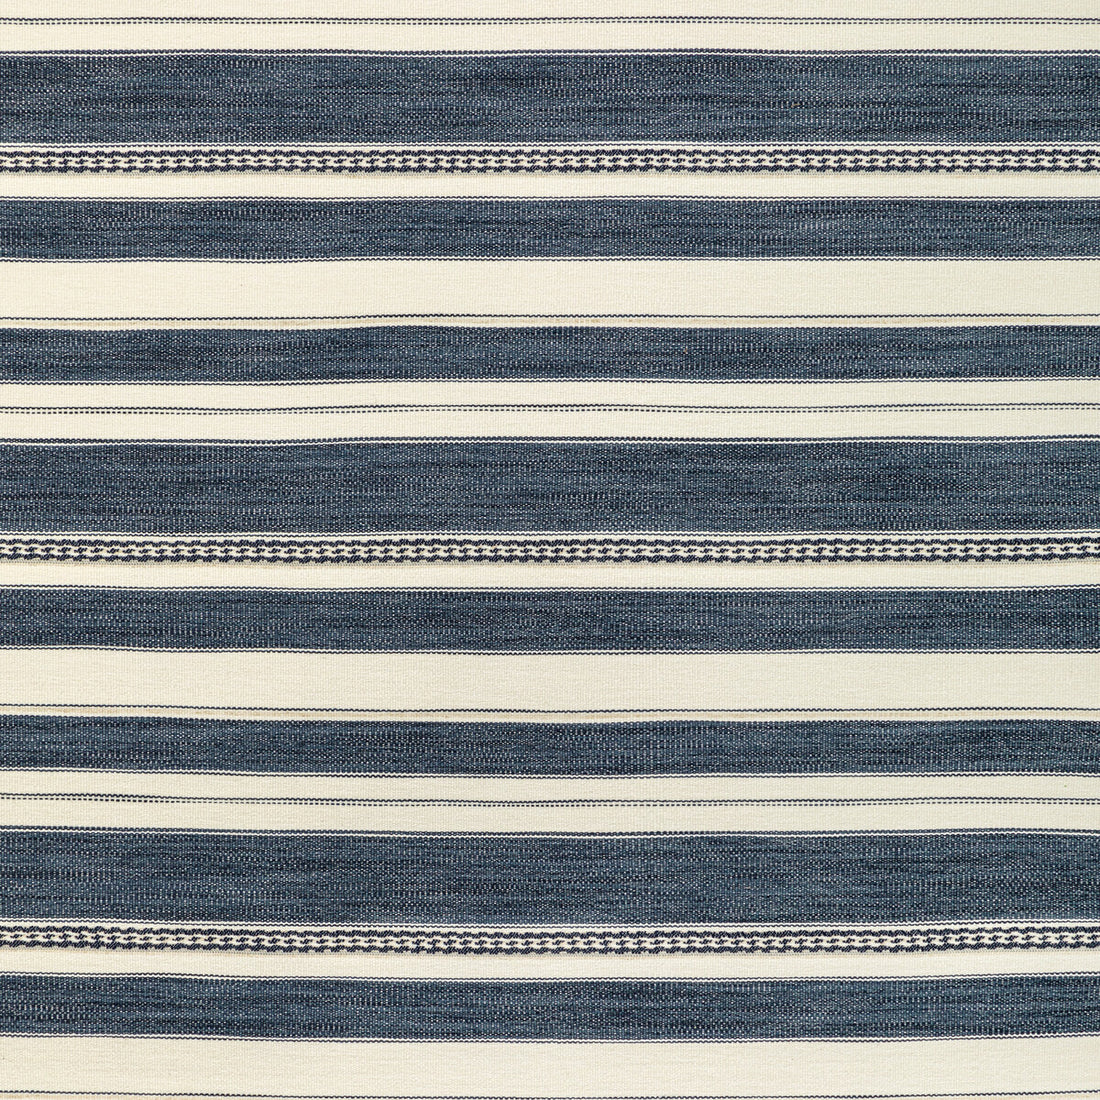 Entoto Stripe fabric in marine/ivory color - pattern 2017143.501.0 - by Lee Jofa in the Breckenridge collection